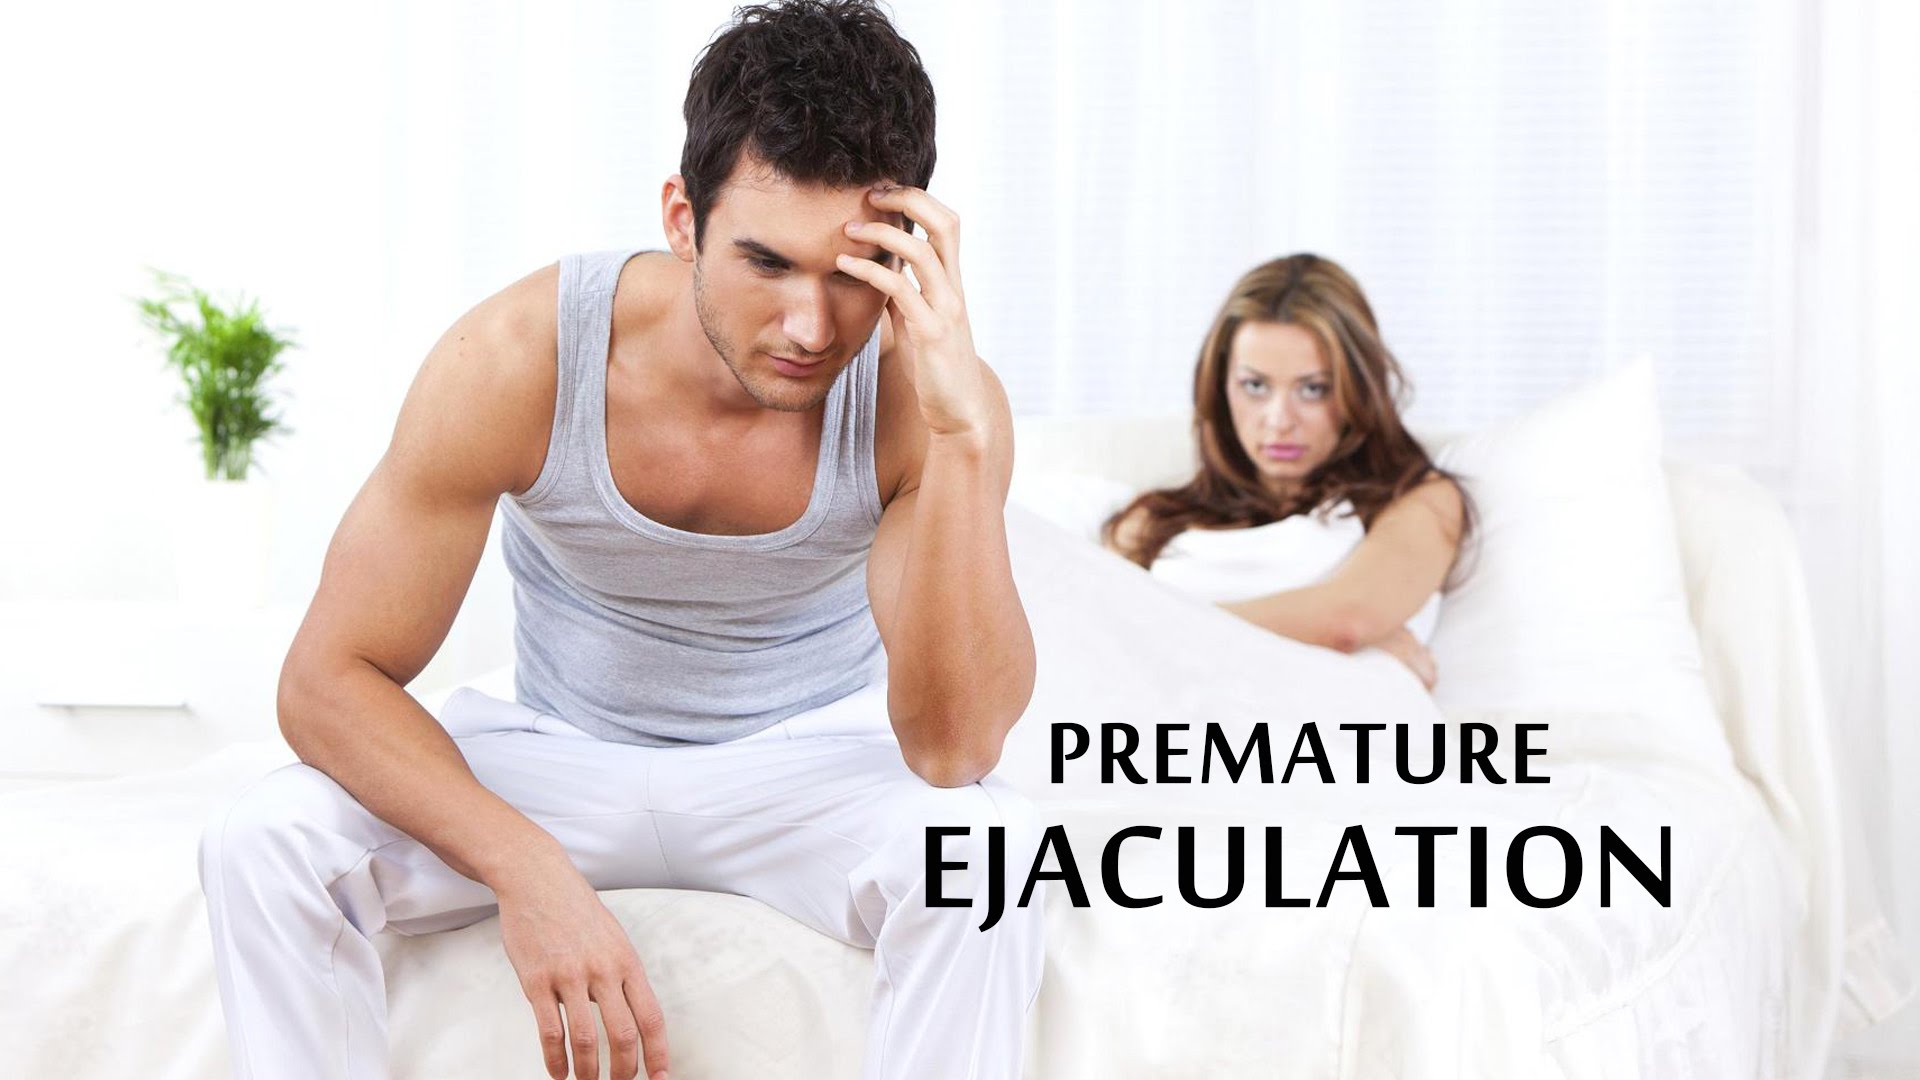 How To Cure Premature Ejaculation Naturally